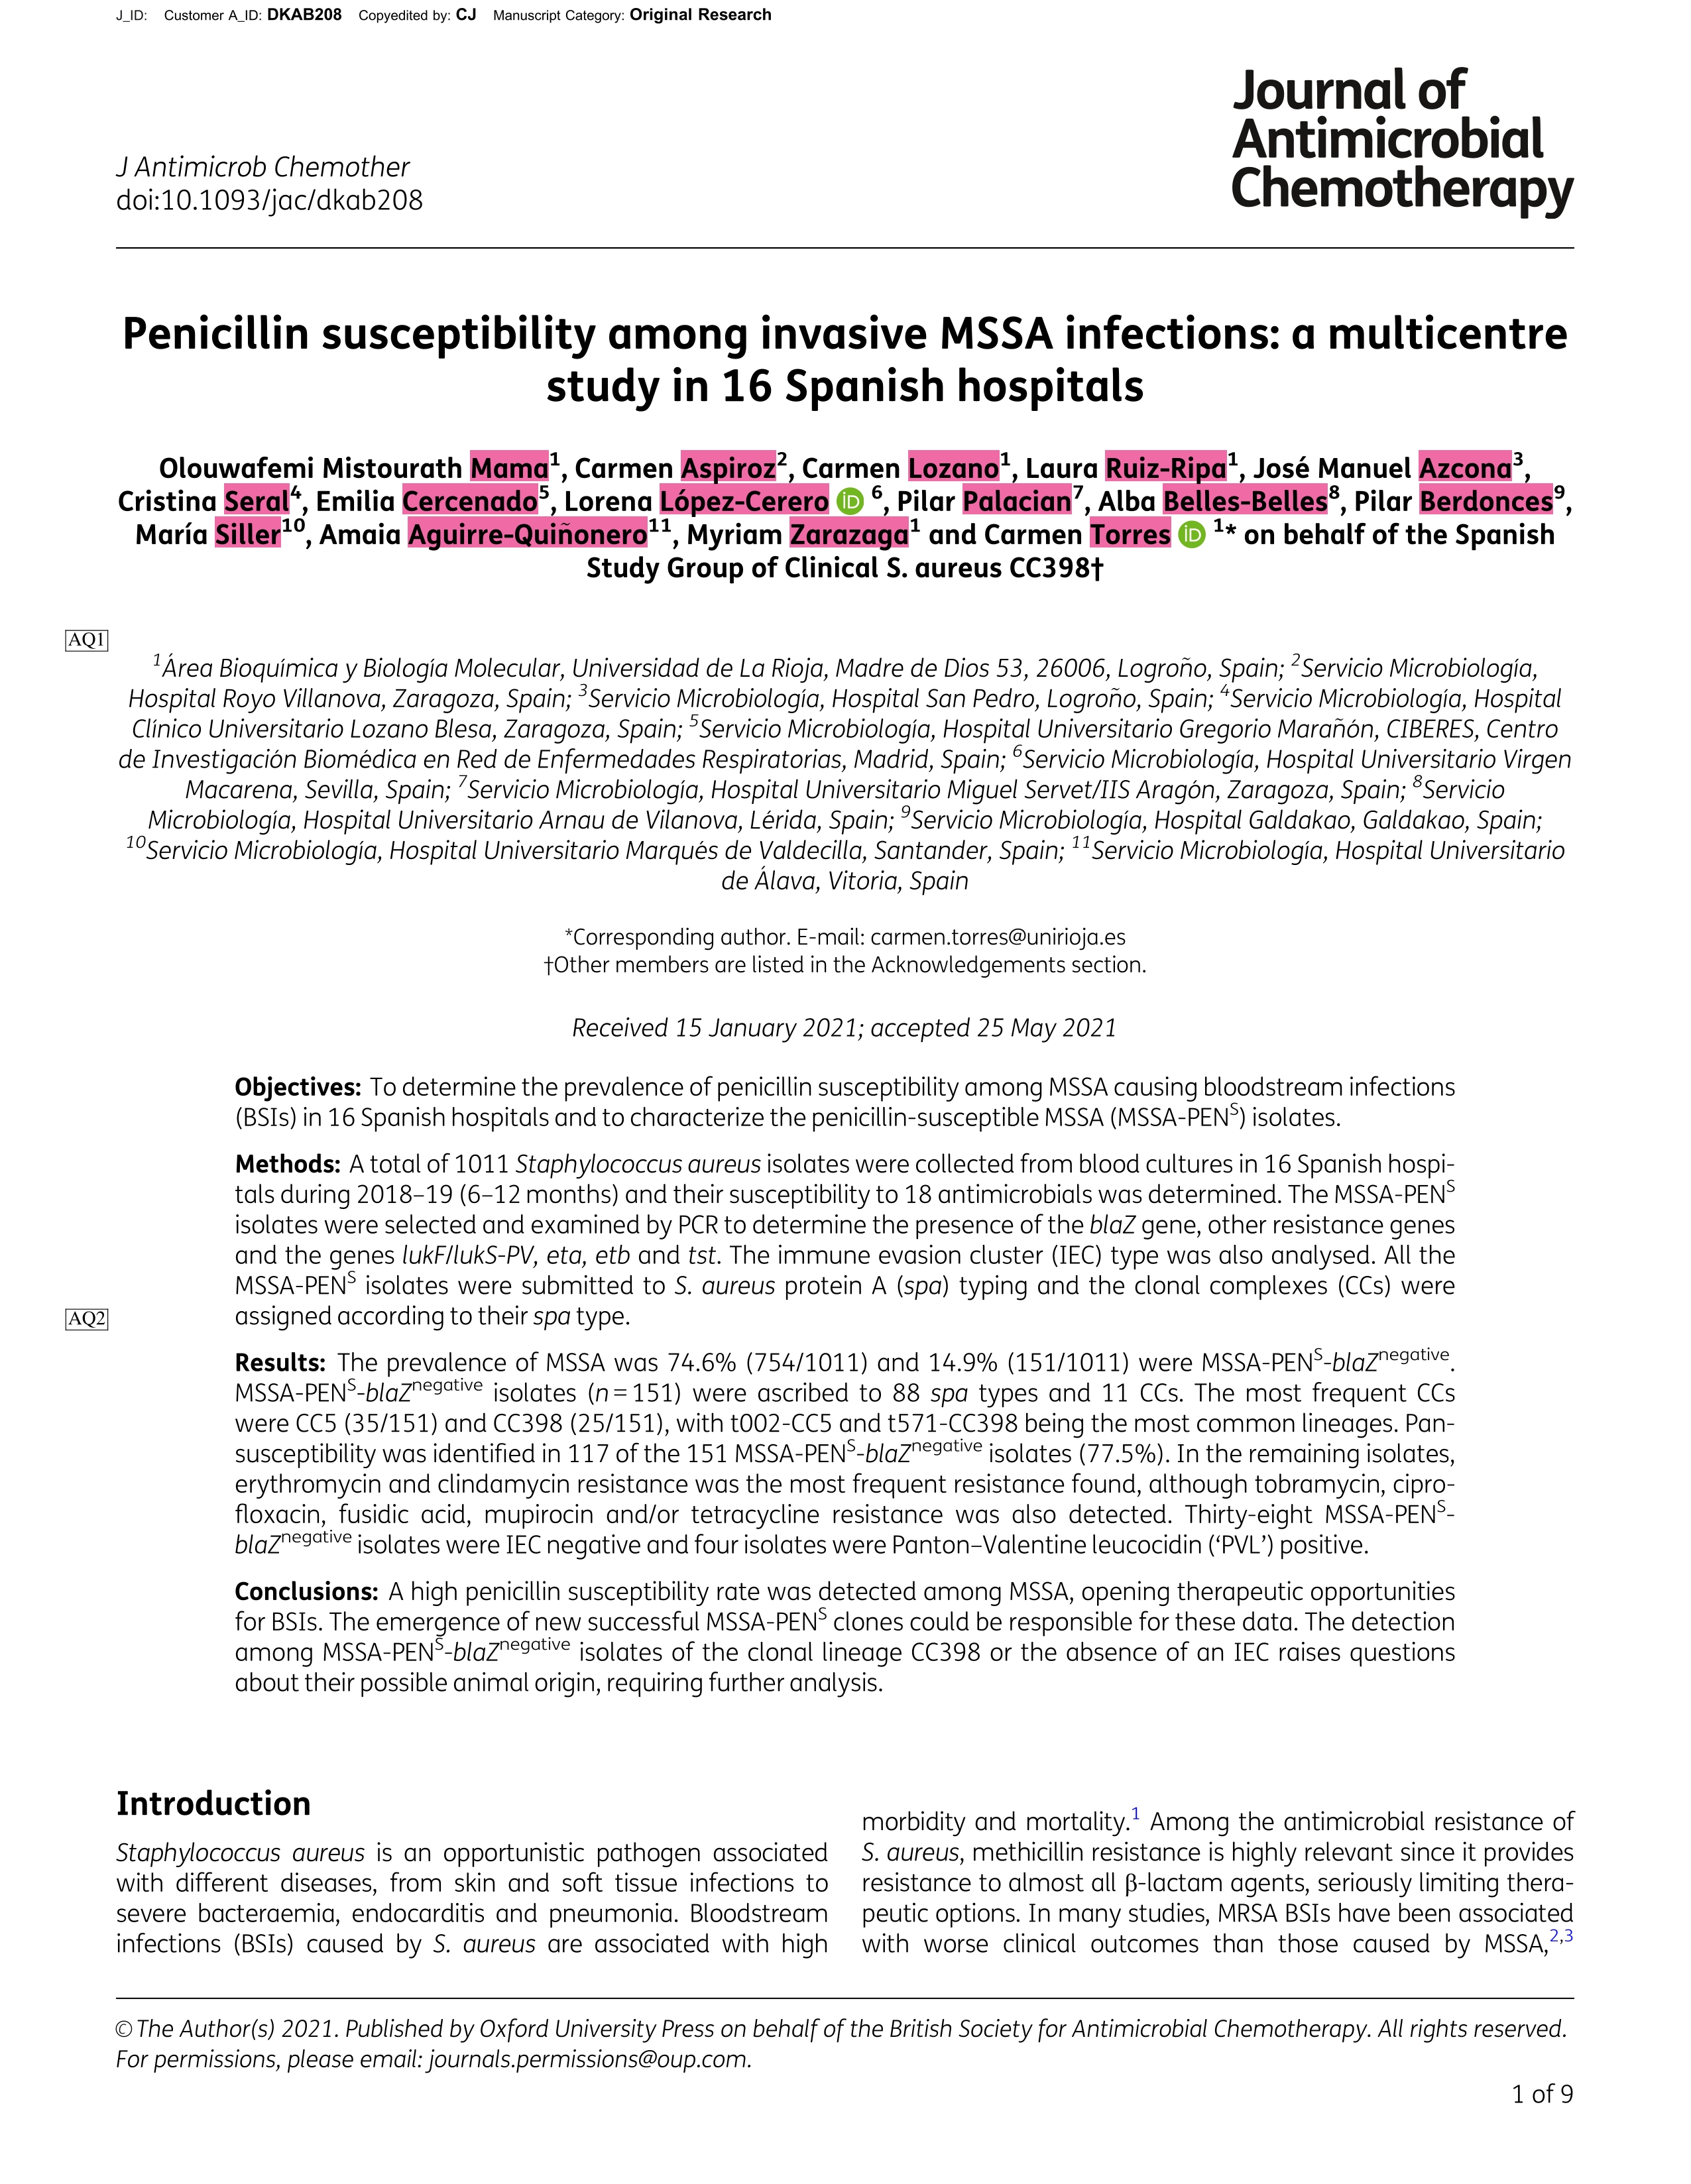 Penicillin susceptibility among invasive MSSA infections: a multicentre study in 16 Spanish hospitals